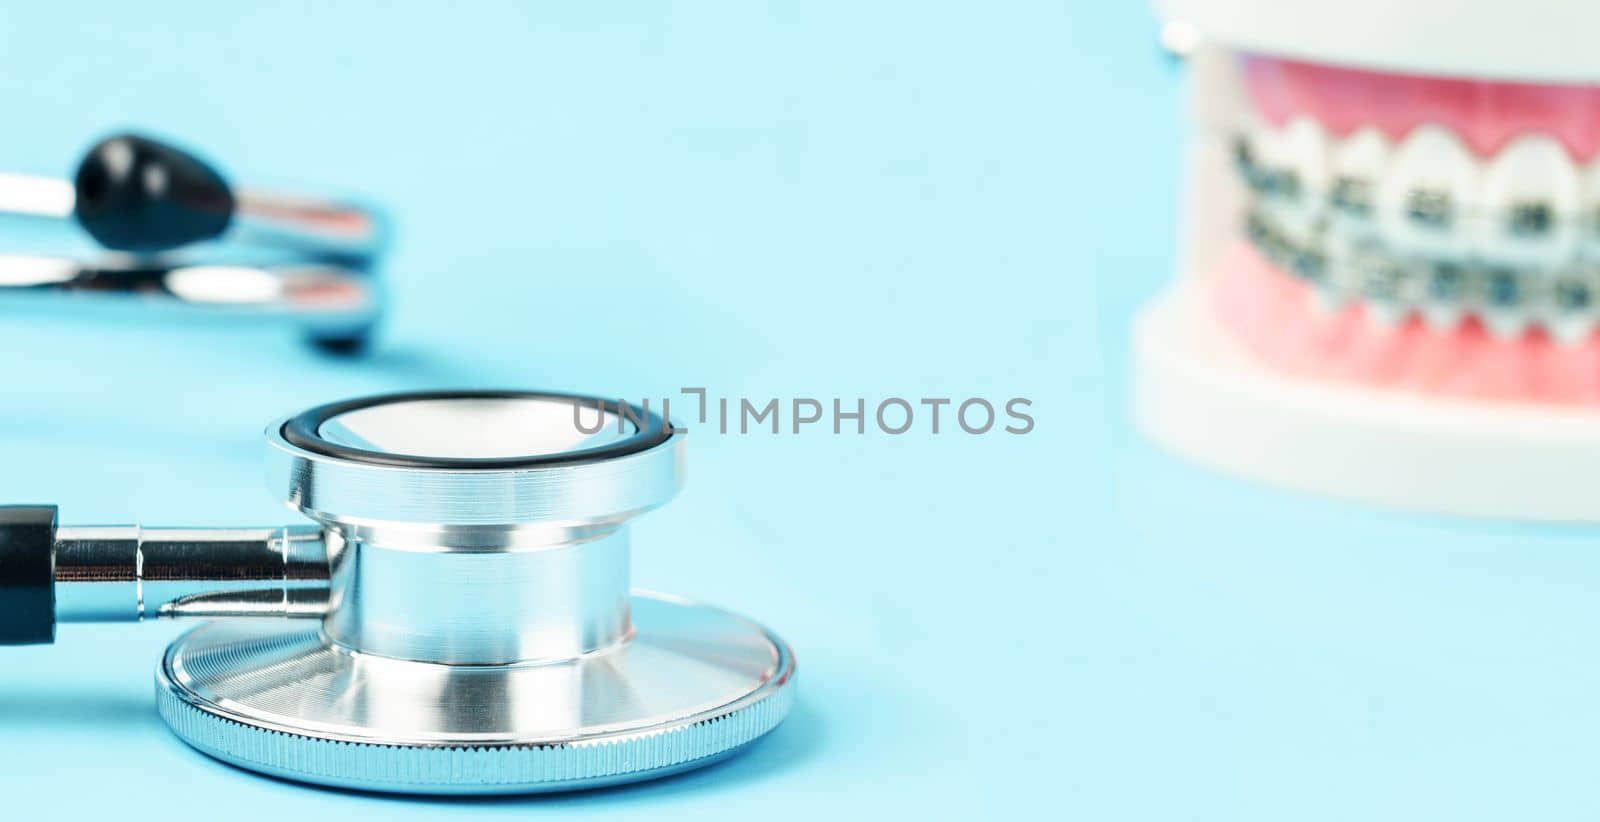 Medicine equipment stethoscope and metal wire dental braces on model teeth on blue background. Health dental care concept.